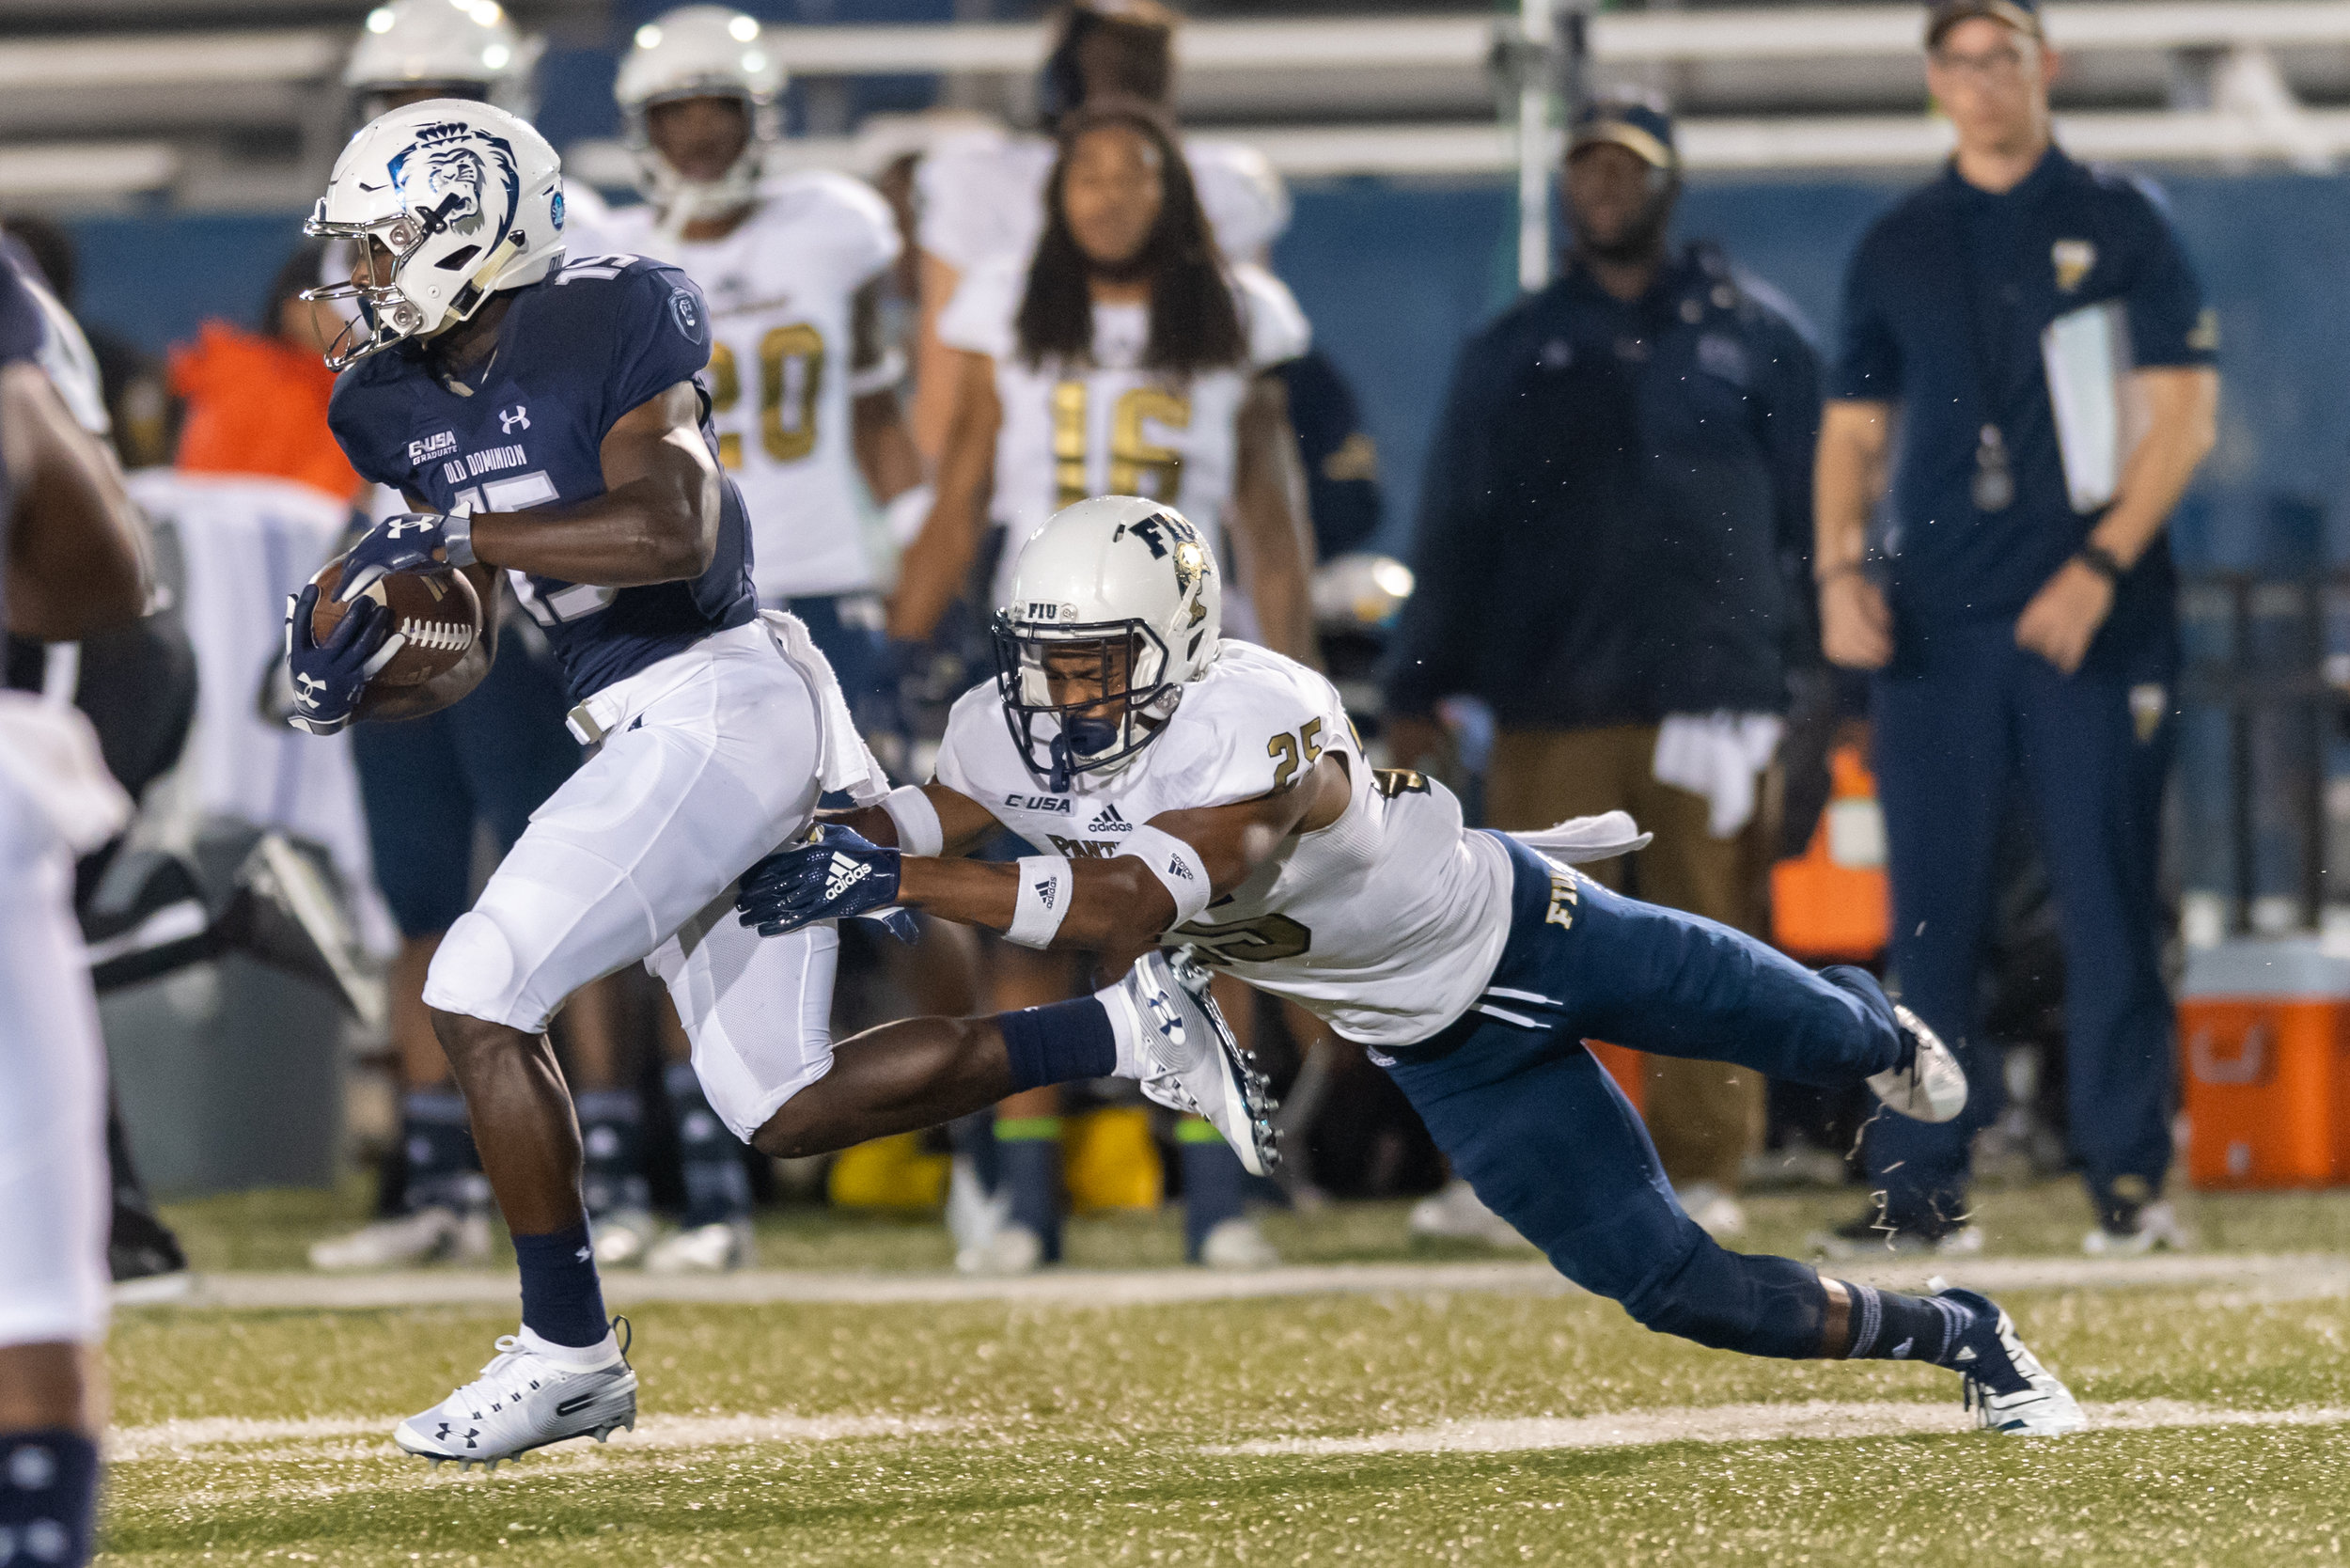  Old Dominion Monarchs wide receiver Isaiah Harper (15) works to escape FIU Panthers defensive back Aris Duffey (25) during the Saturday, Sept. 8, 2018 game held at Old Dominion University in Norfolk, Virginia. FIU defeated Old Dominion 28 to 20. 